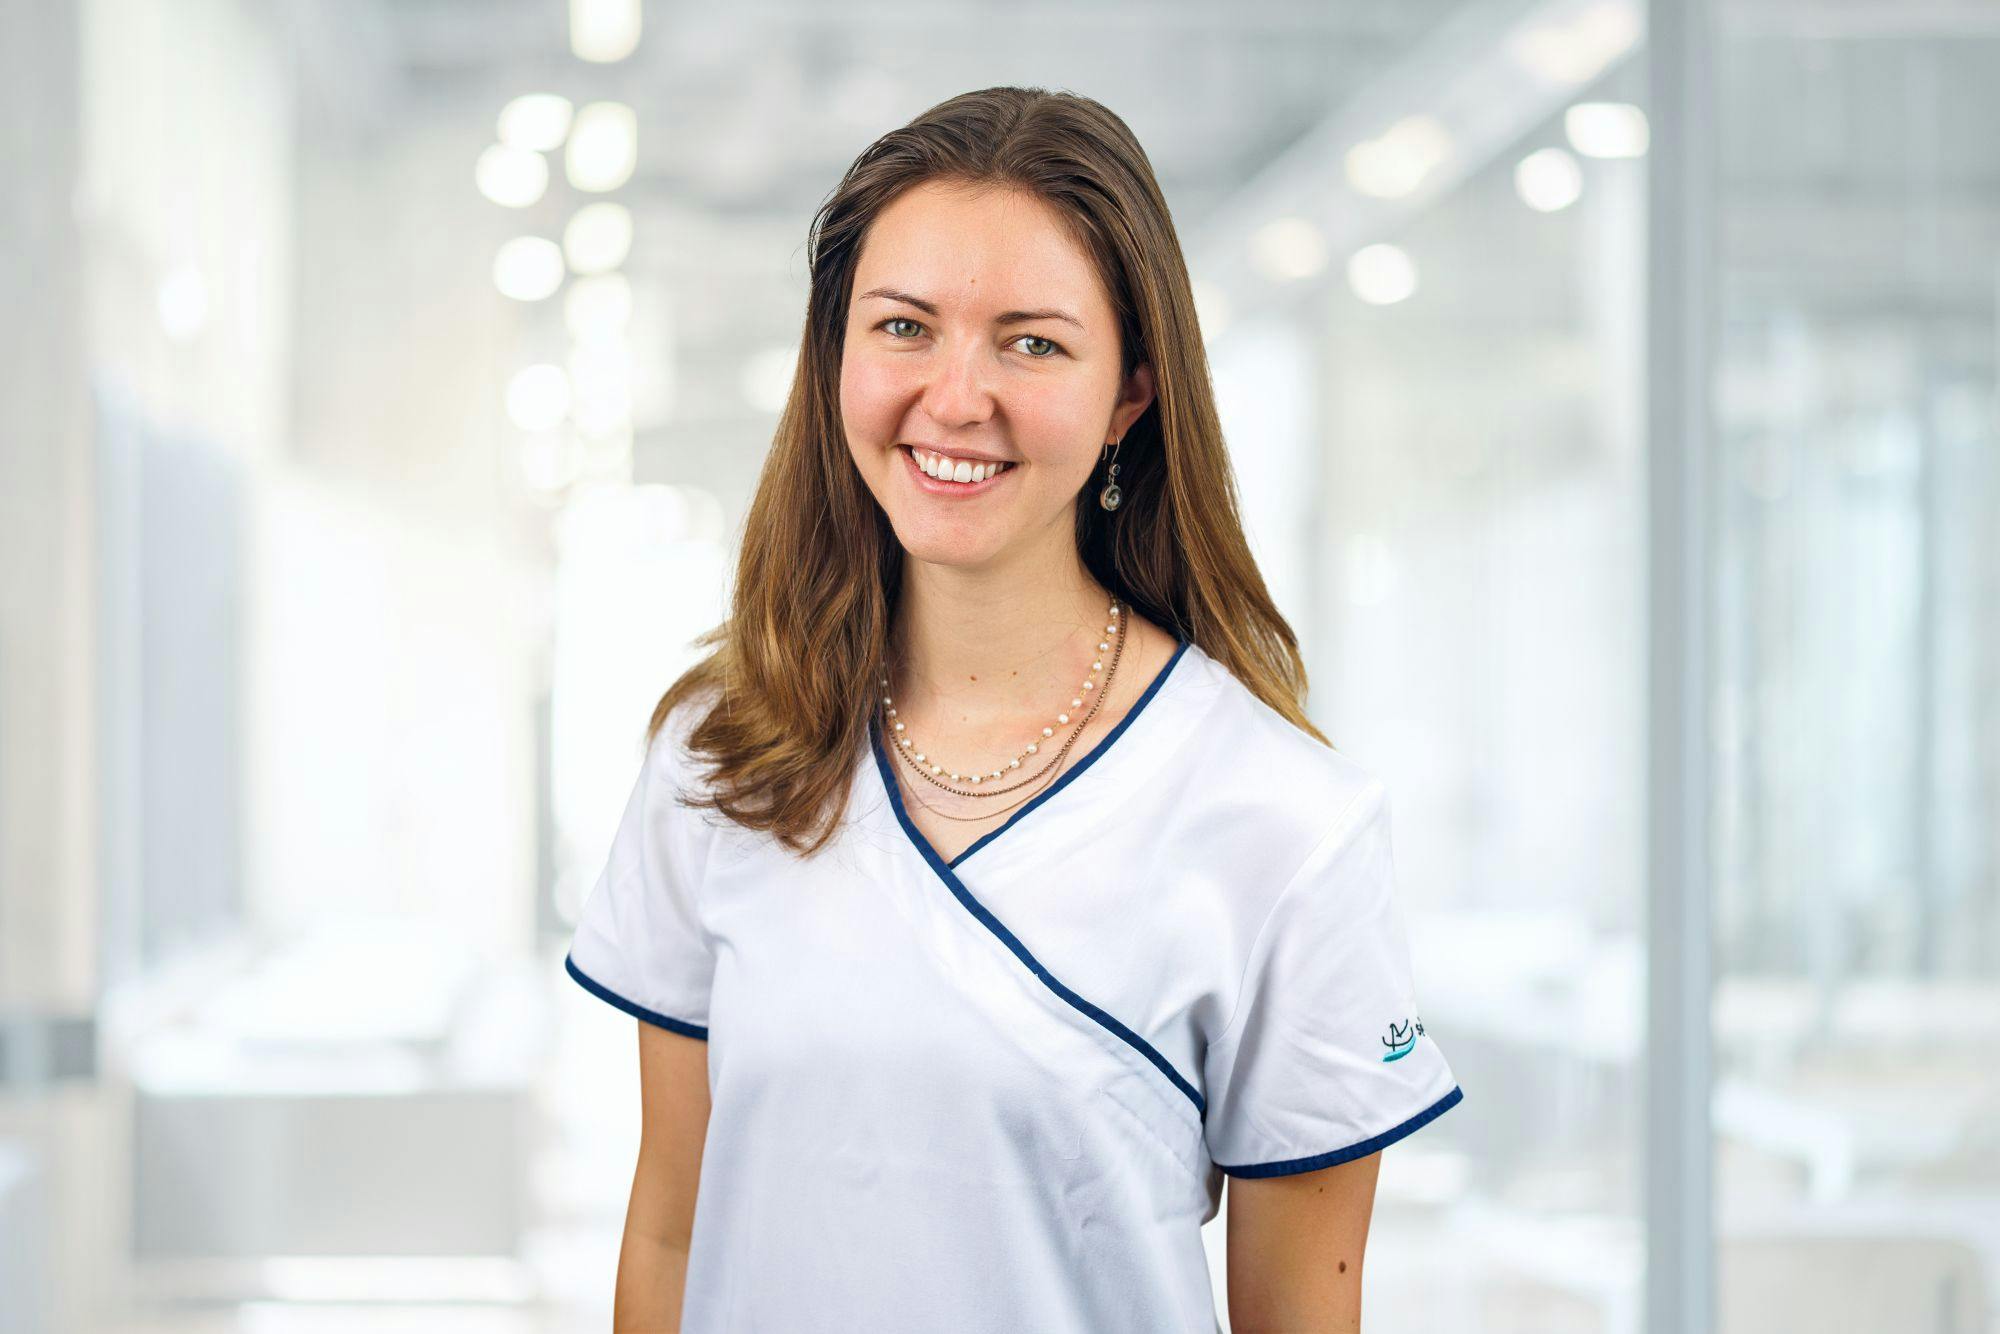 Smiling woman in medical professional clothing against a blurred background.